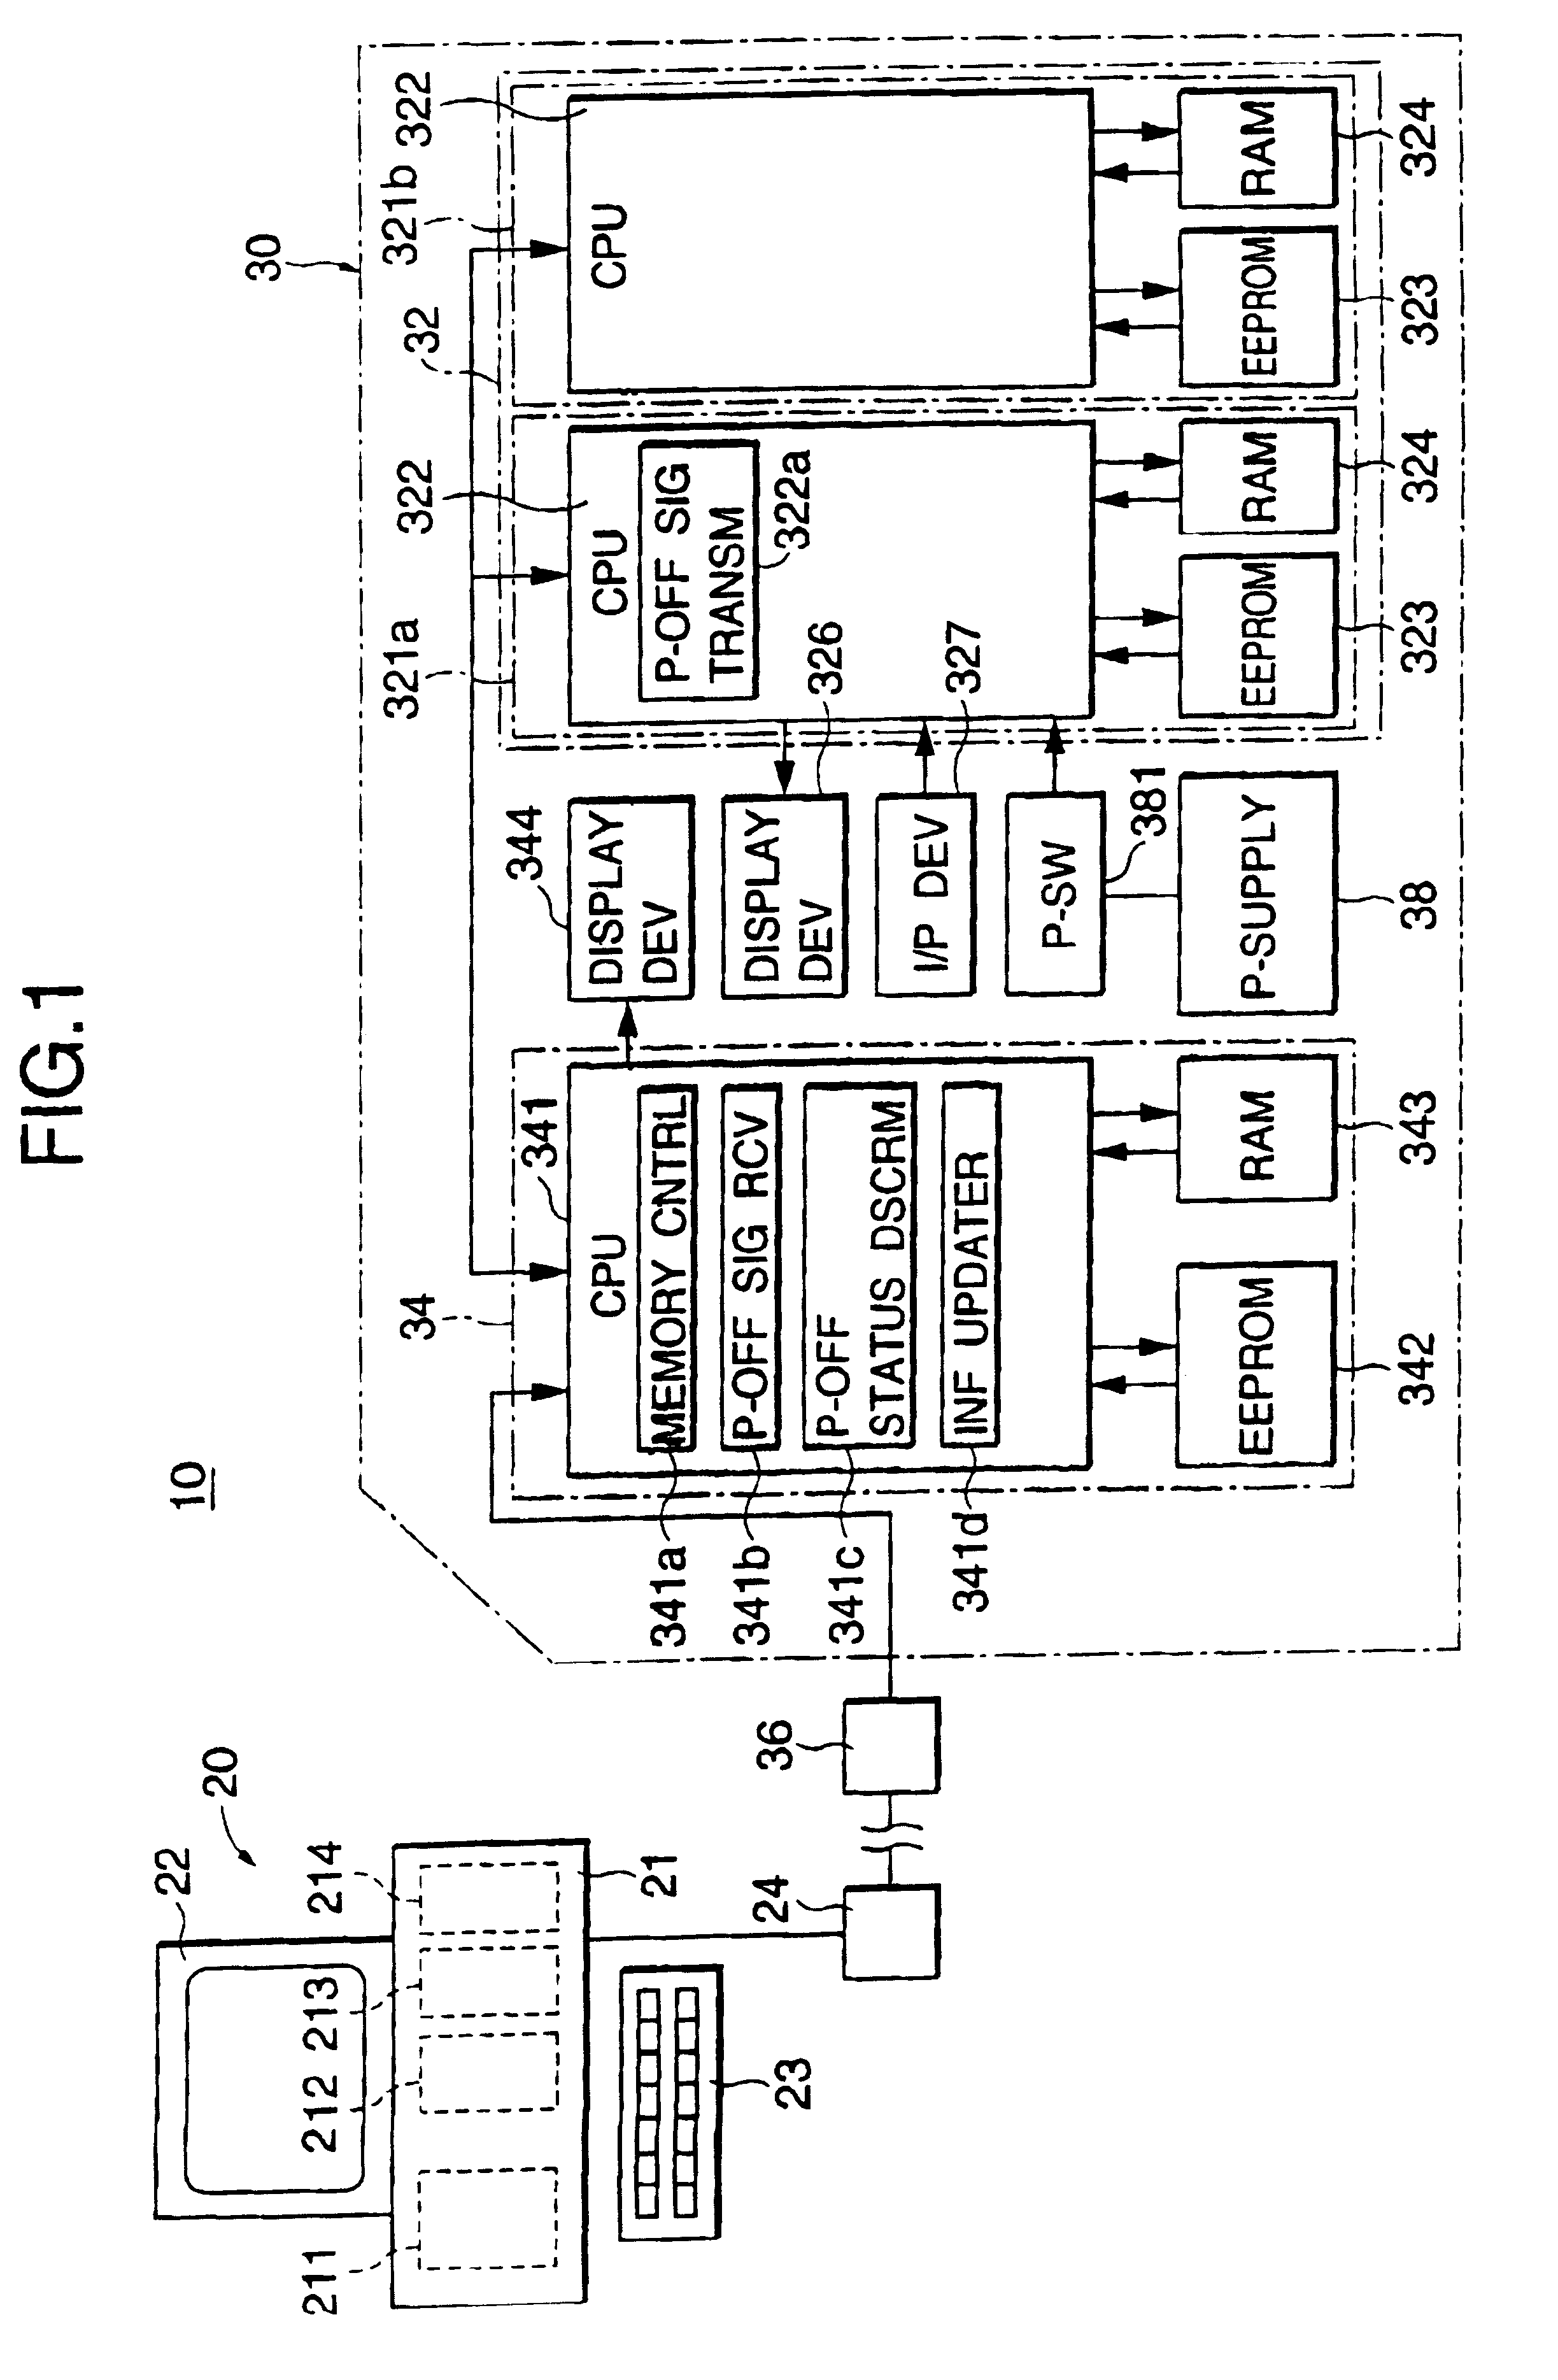 Processing apparatus and an operation control information update system employing the processing apparatus